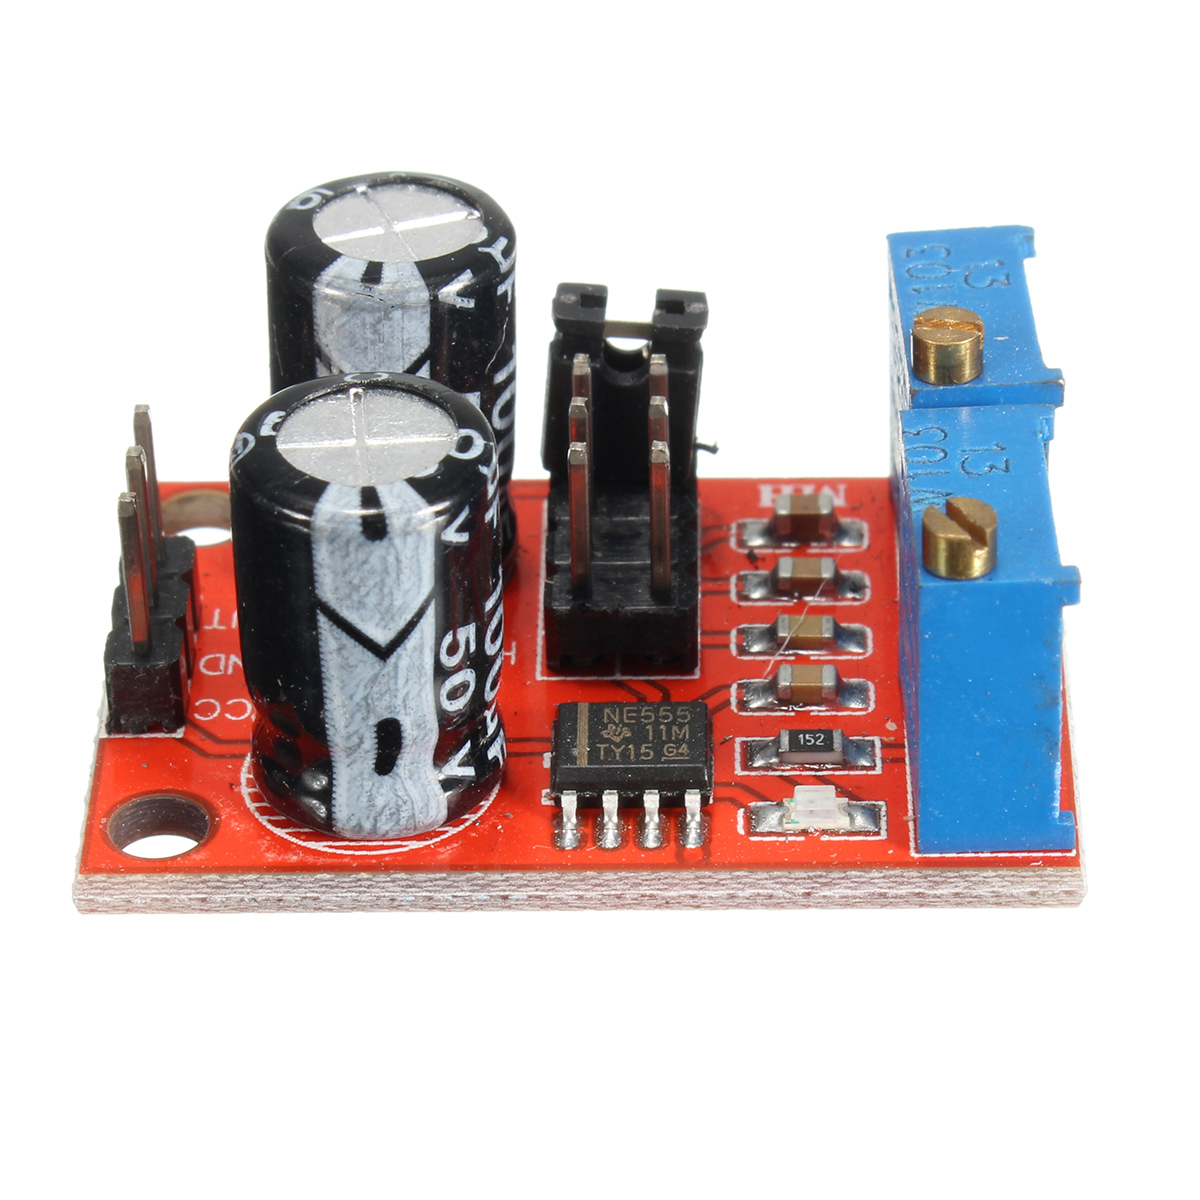 5pcs-NE555-Pulse-Frequency-Duty-Cycle-Adjustable-Module-Square-Wave-Signal-Generator-Stepper-Motor-D-1167078